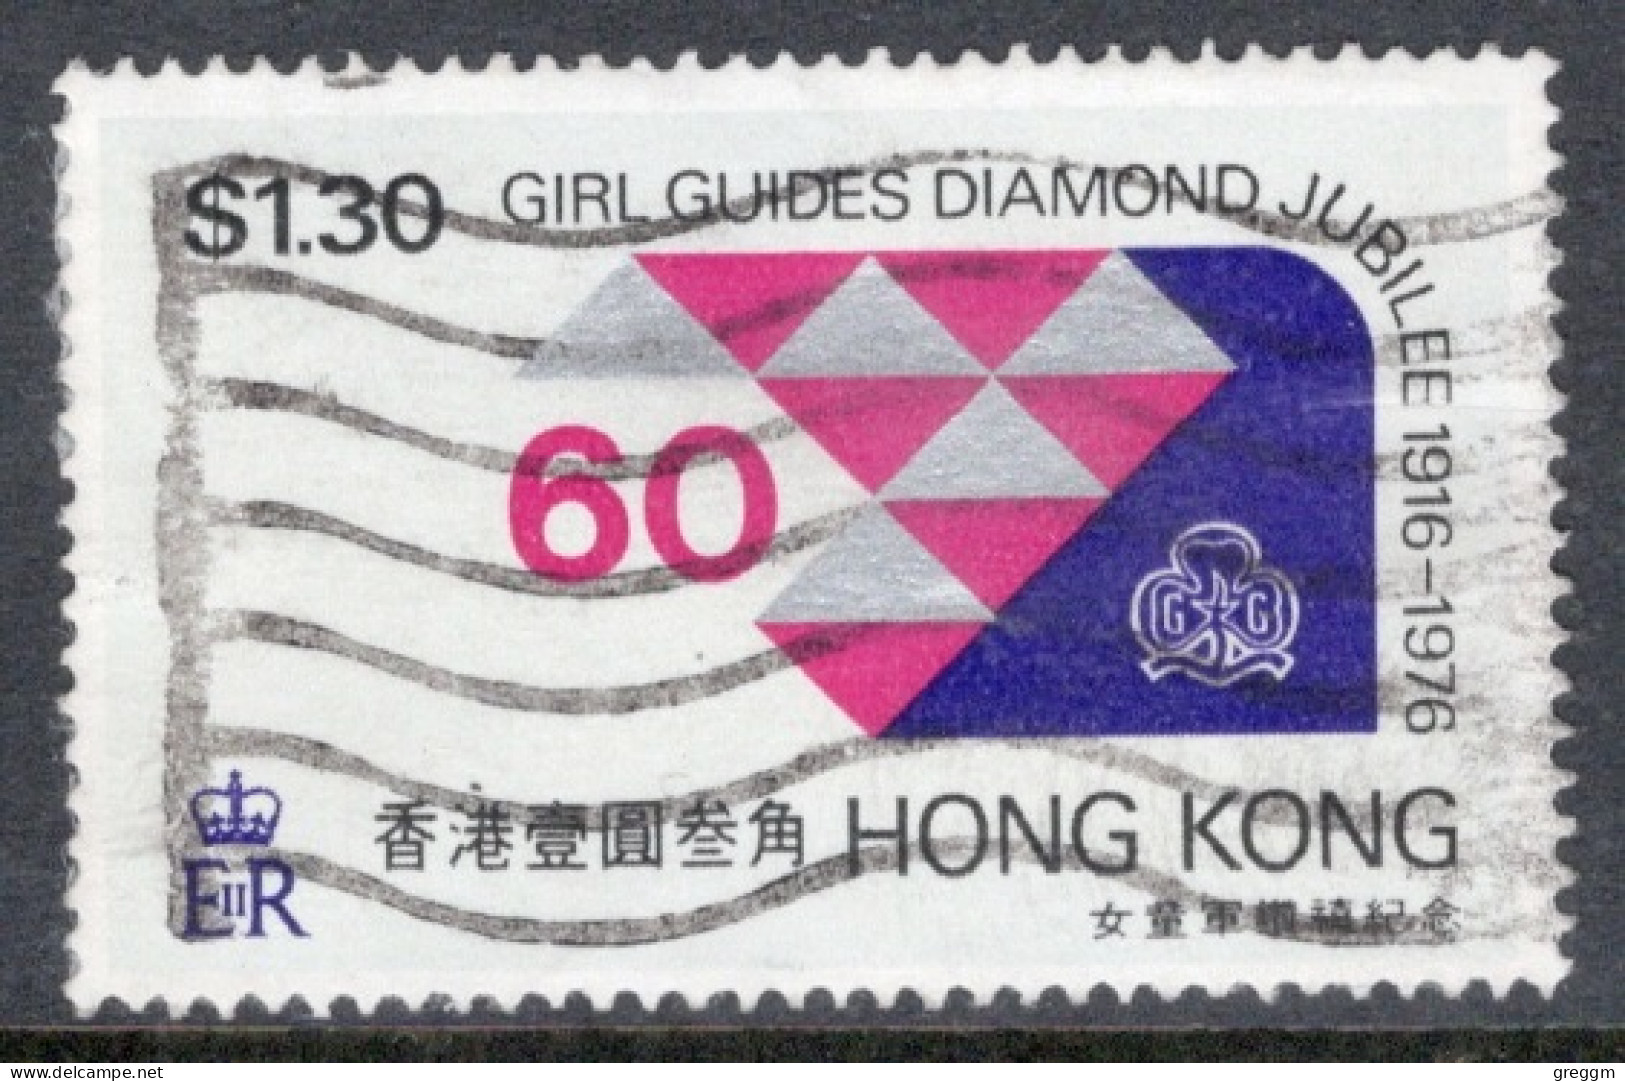 Hong Kong 1976 A Single Stamp To Celebrate The 60th Anniversary Of Girl Guides In Fine Used - Used Stamps